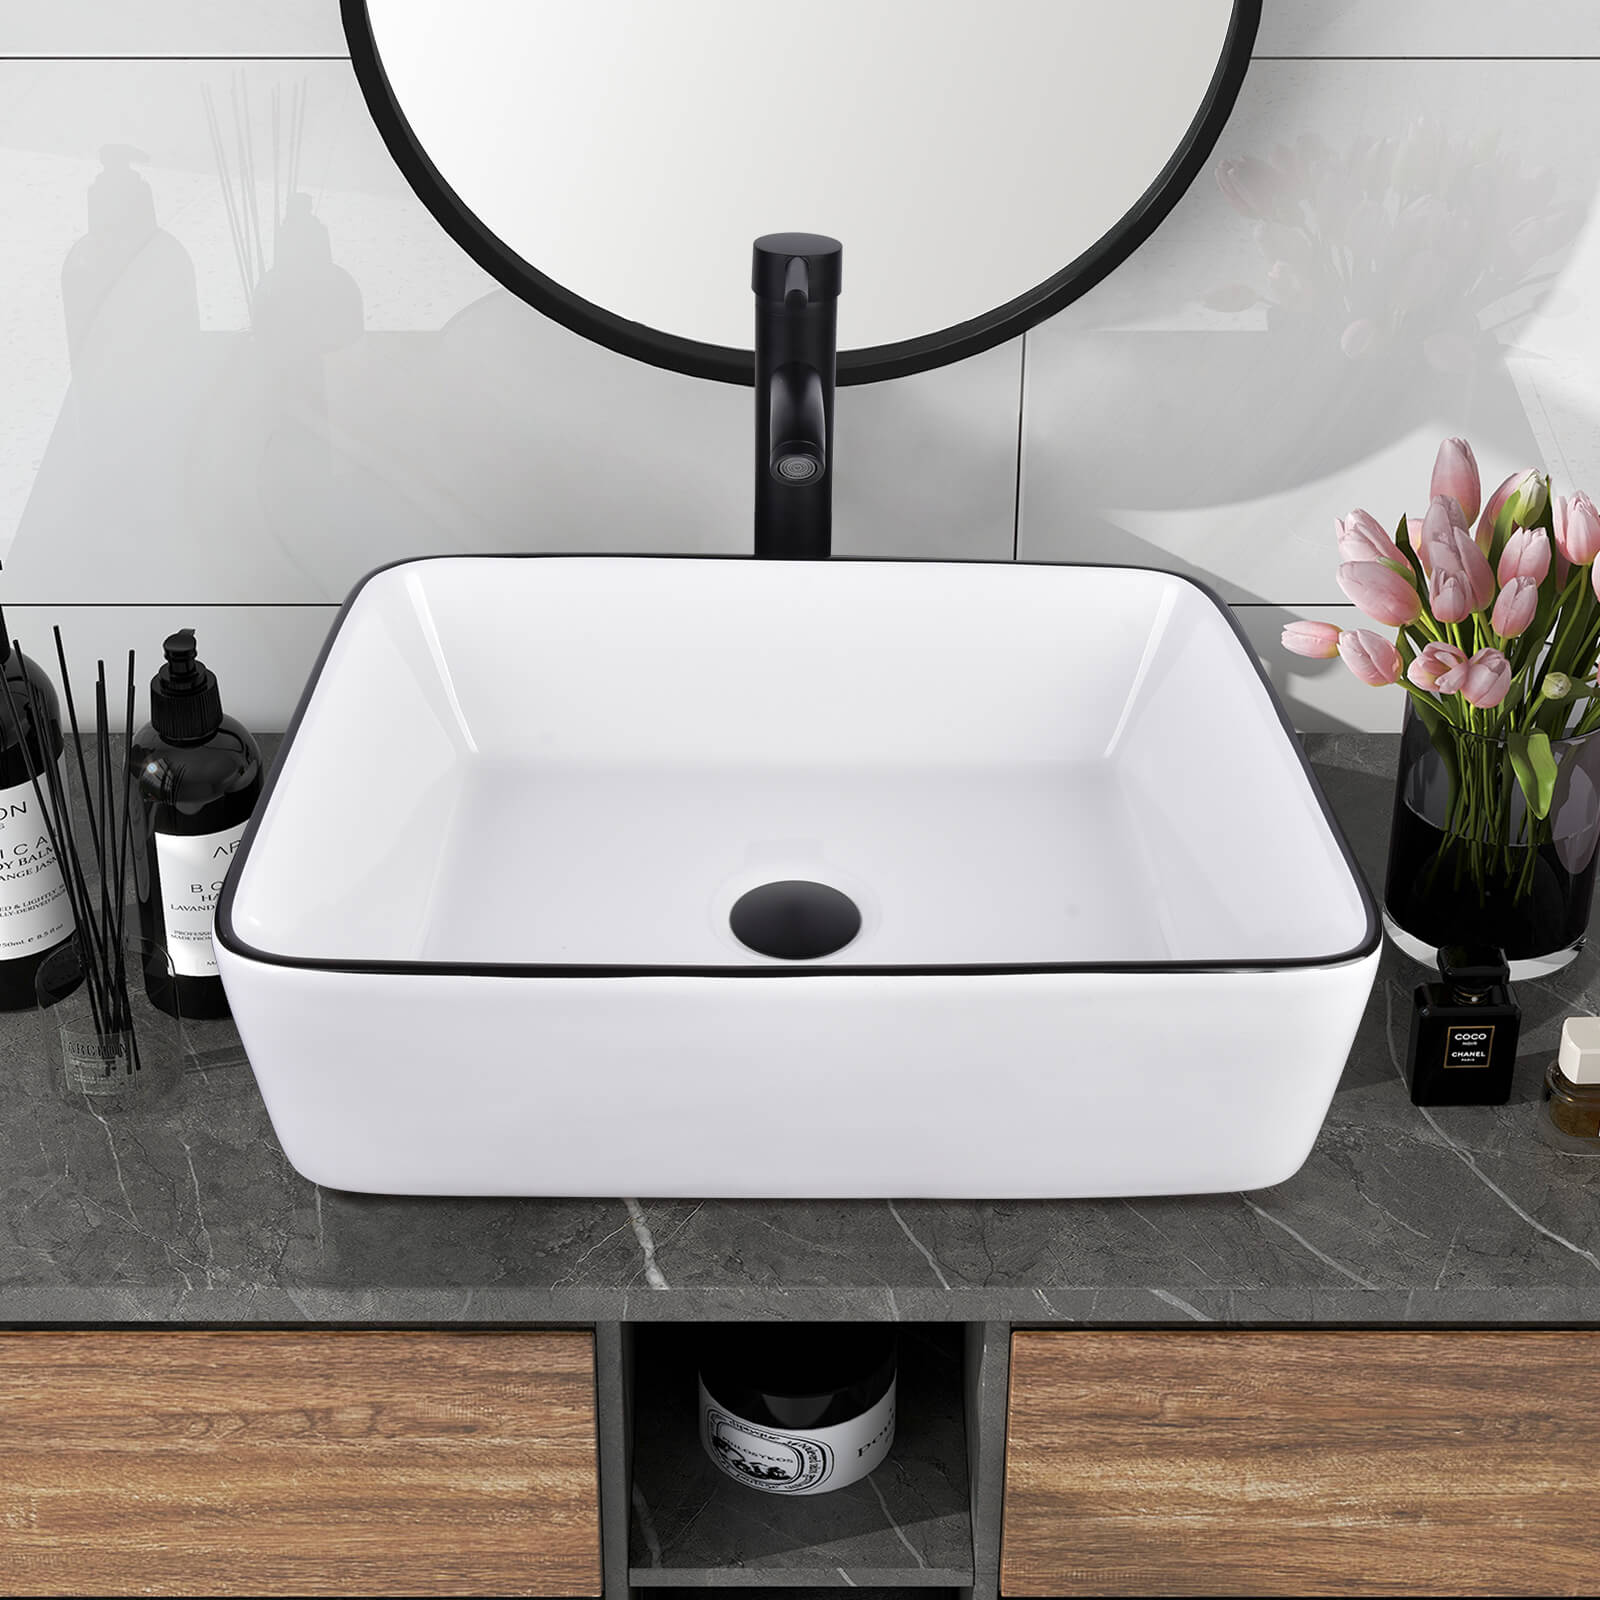 Directly above view of Elecwish rectangular ceramic vessel sink in bathroom